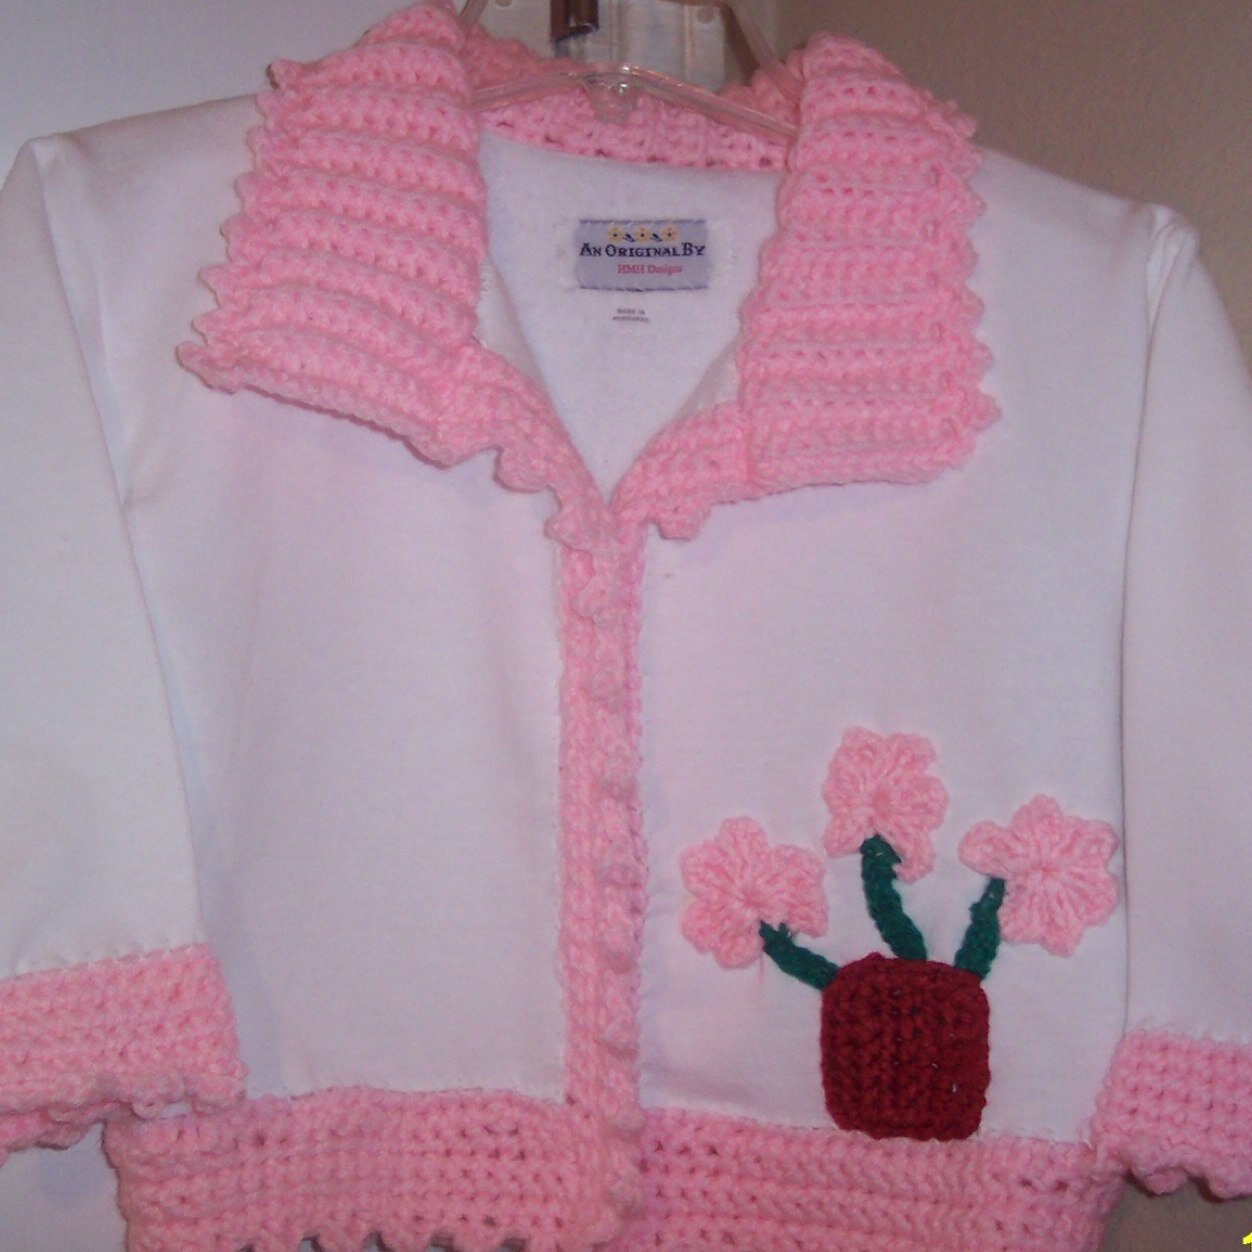 Custom designed, knitted & crocheted creations